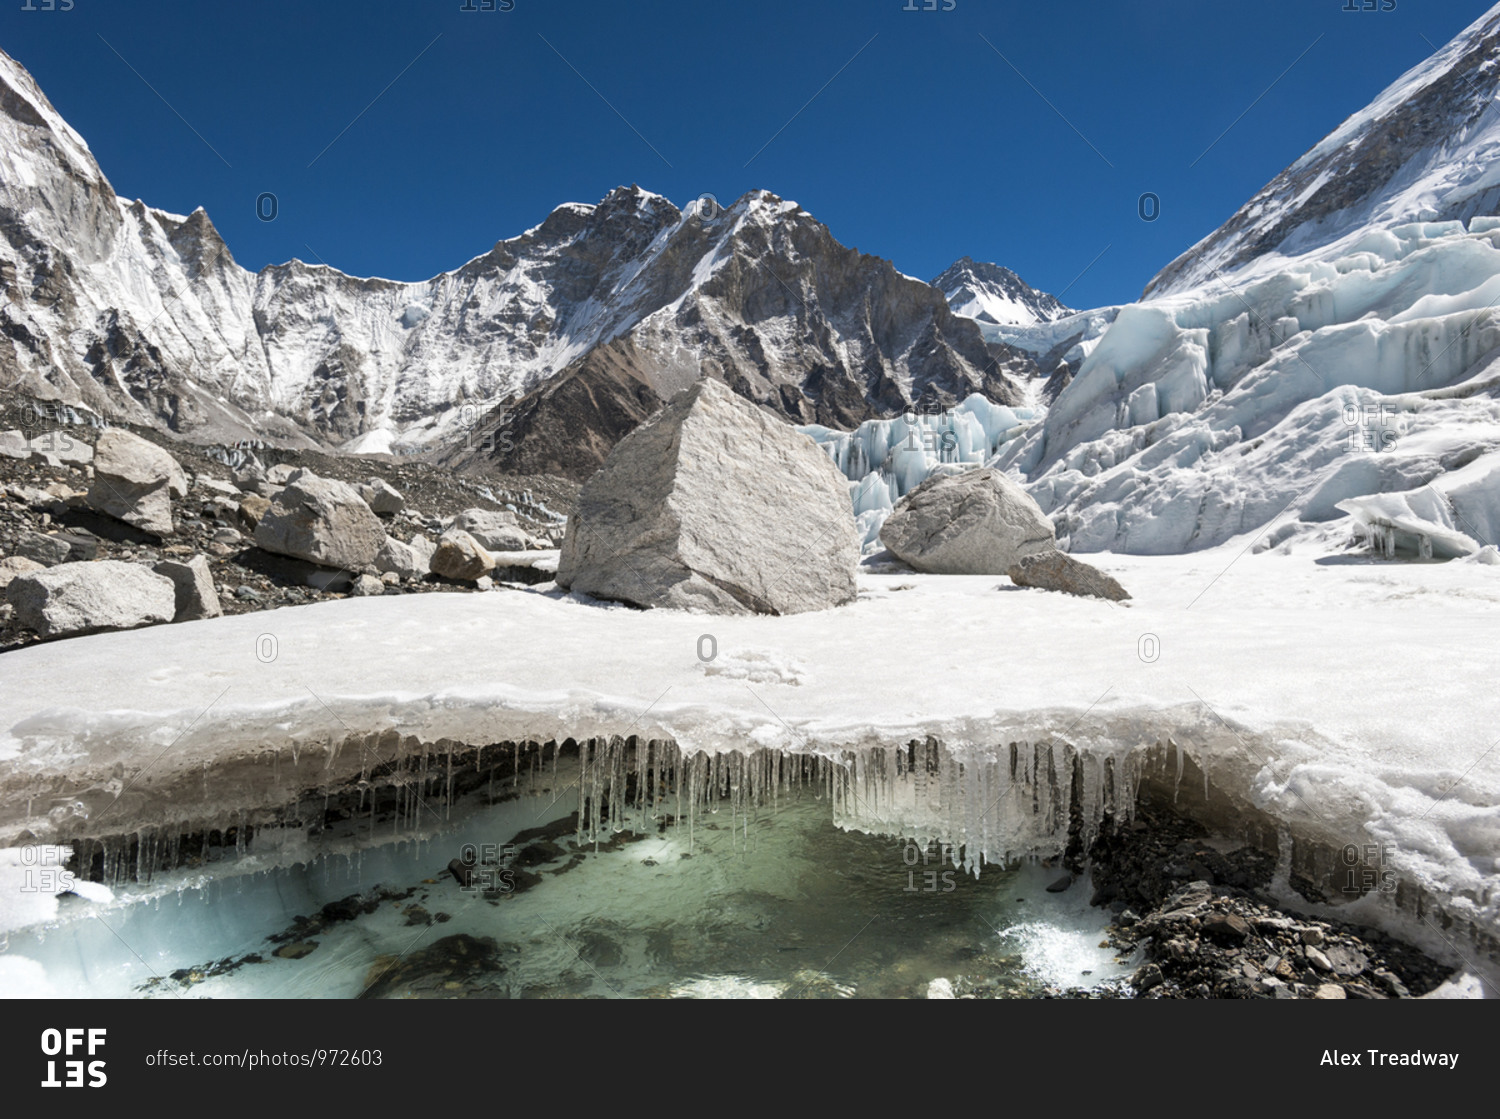 Water forms under the Khumbu glacier as the ice melts